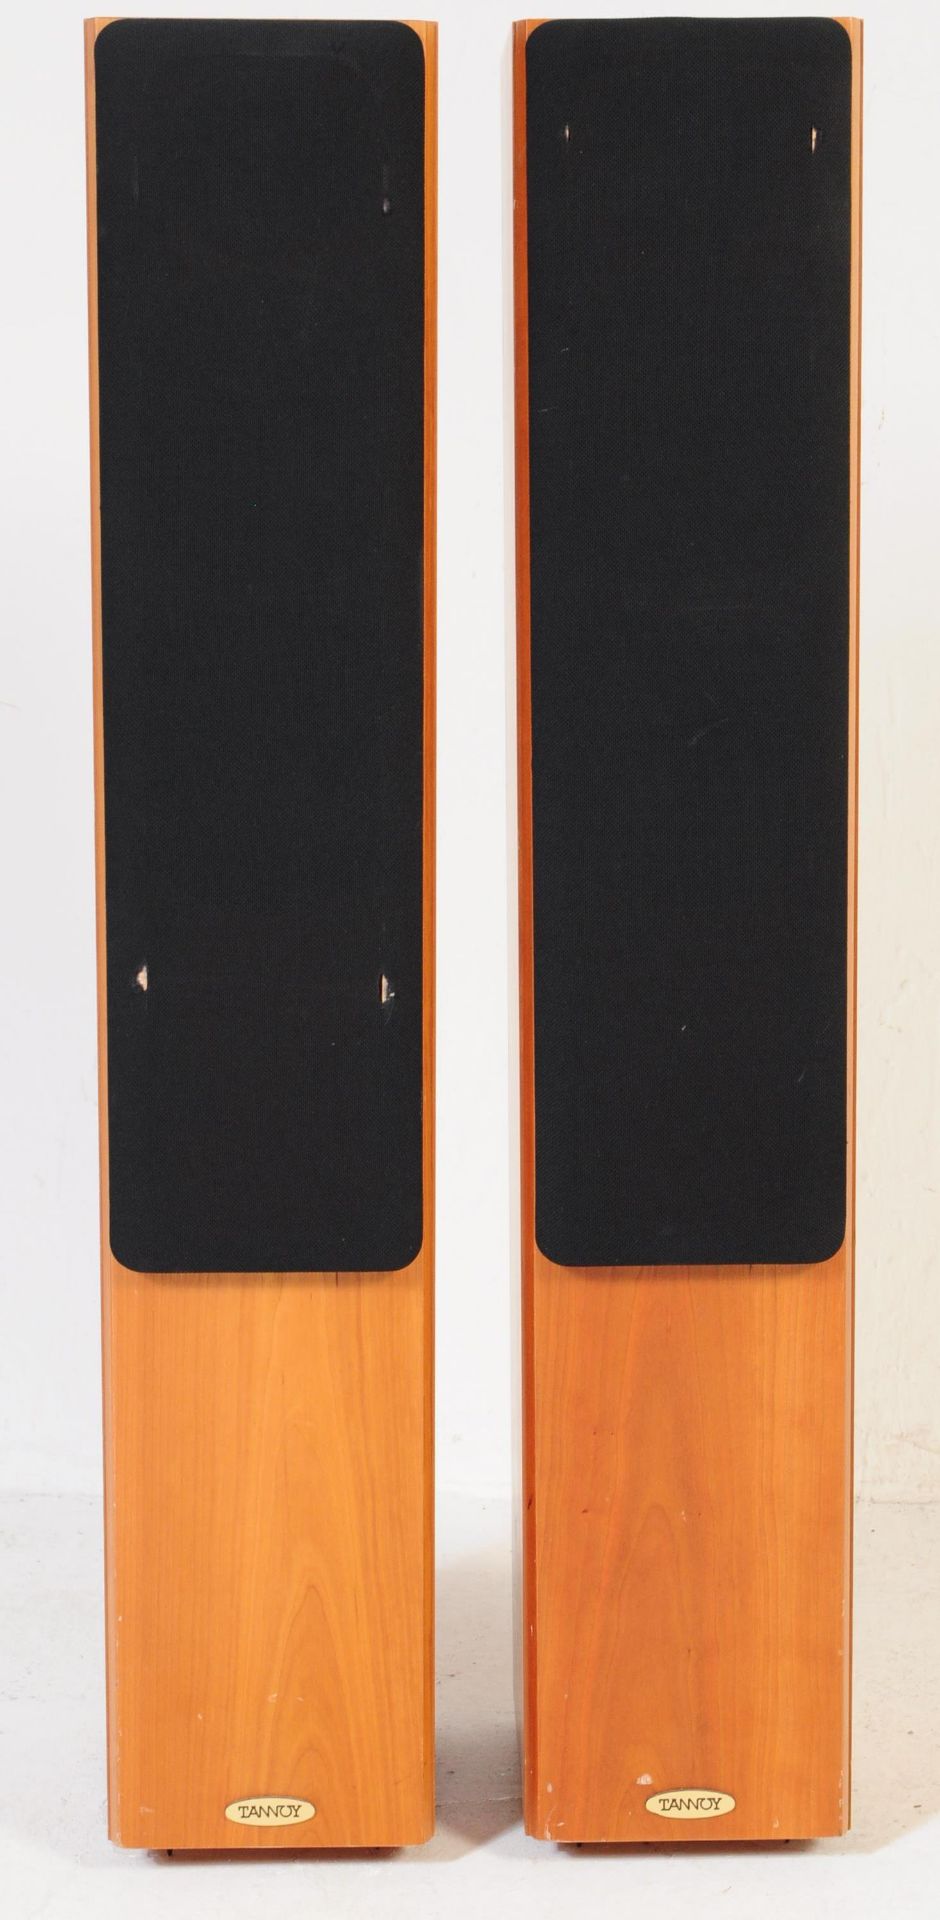 PAIR OF TANNOY REVOLUTION TWO FLOOR STANDING SPEAKERS - Image 3 of 6